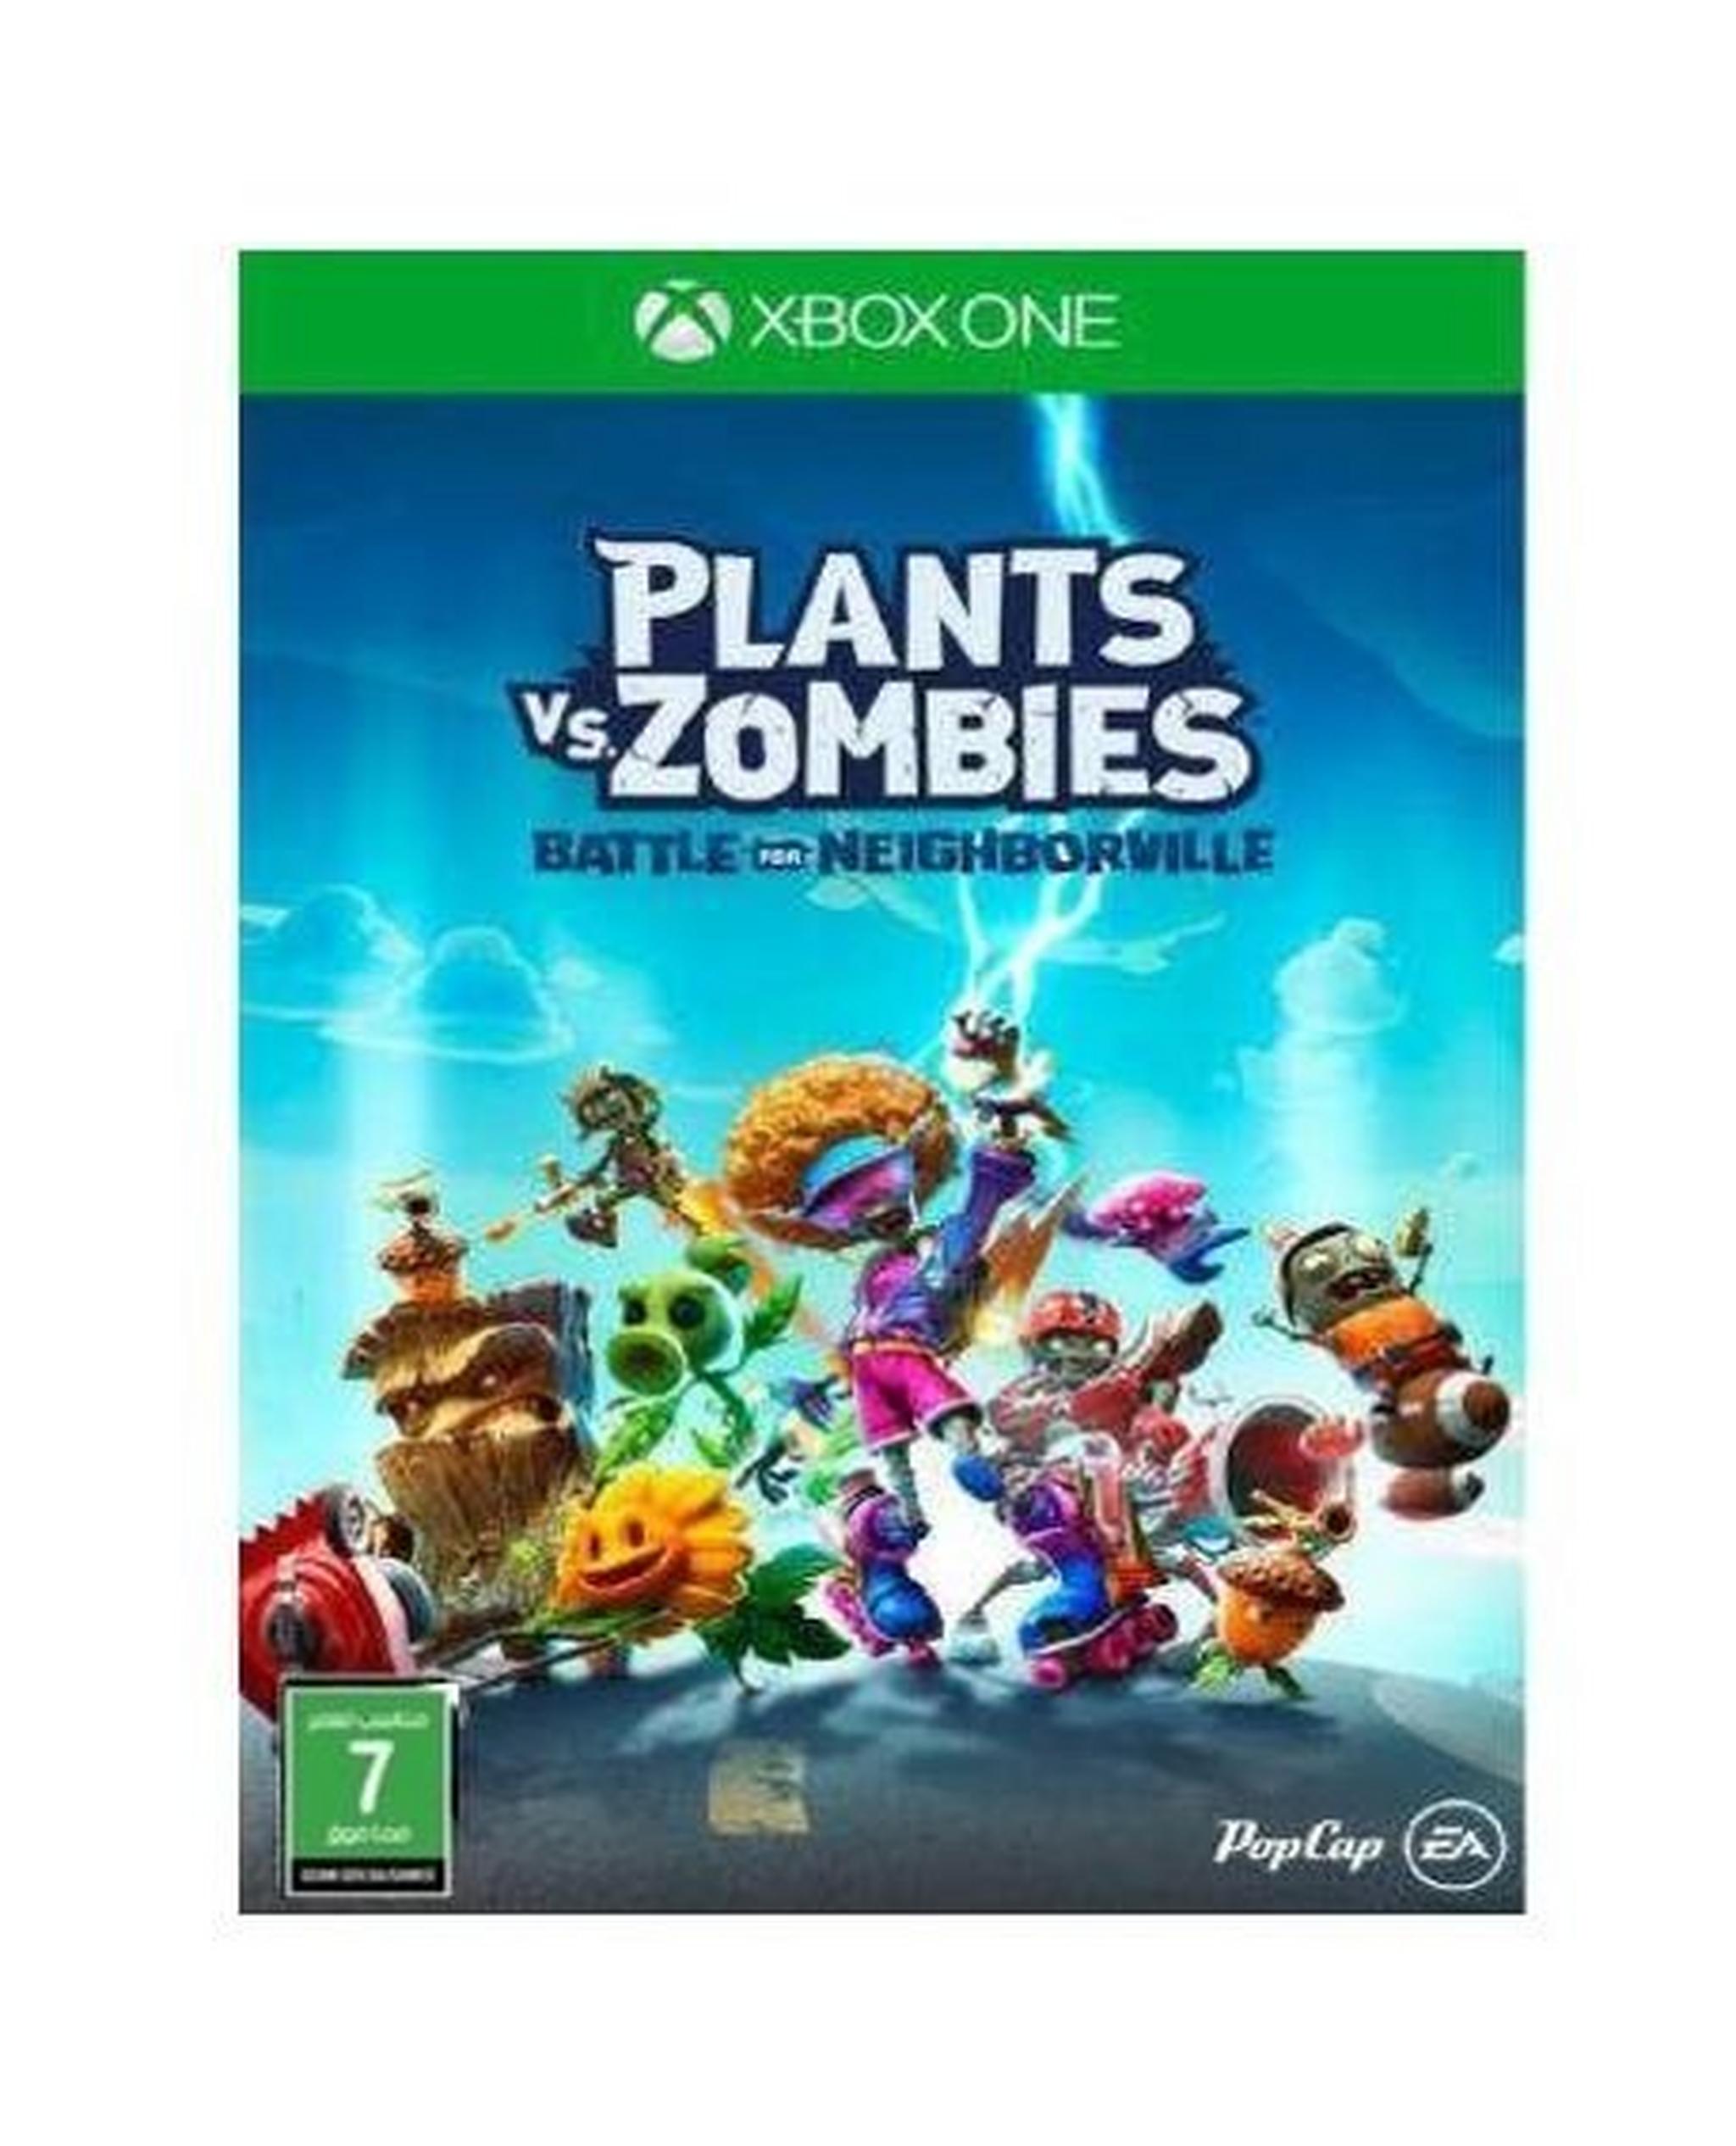 Plants Vs Zombies 3 Battle For Neighborville - XBOX One Game